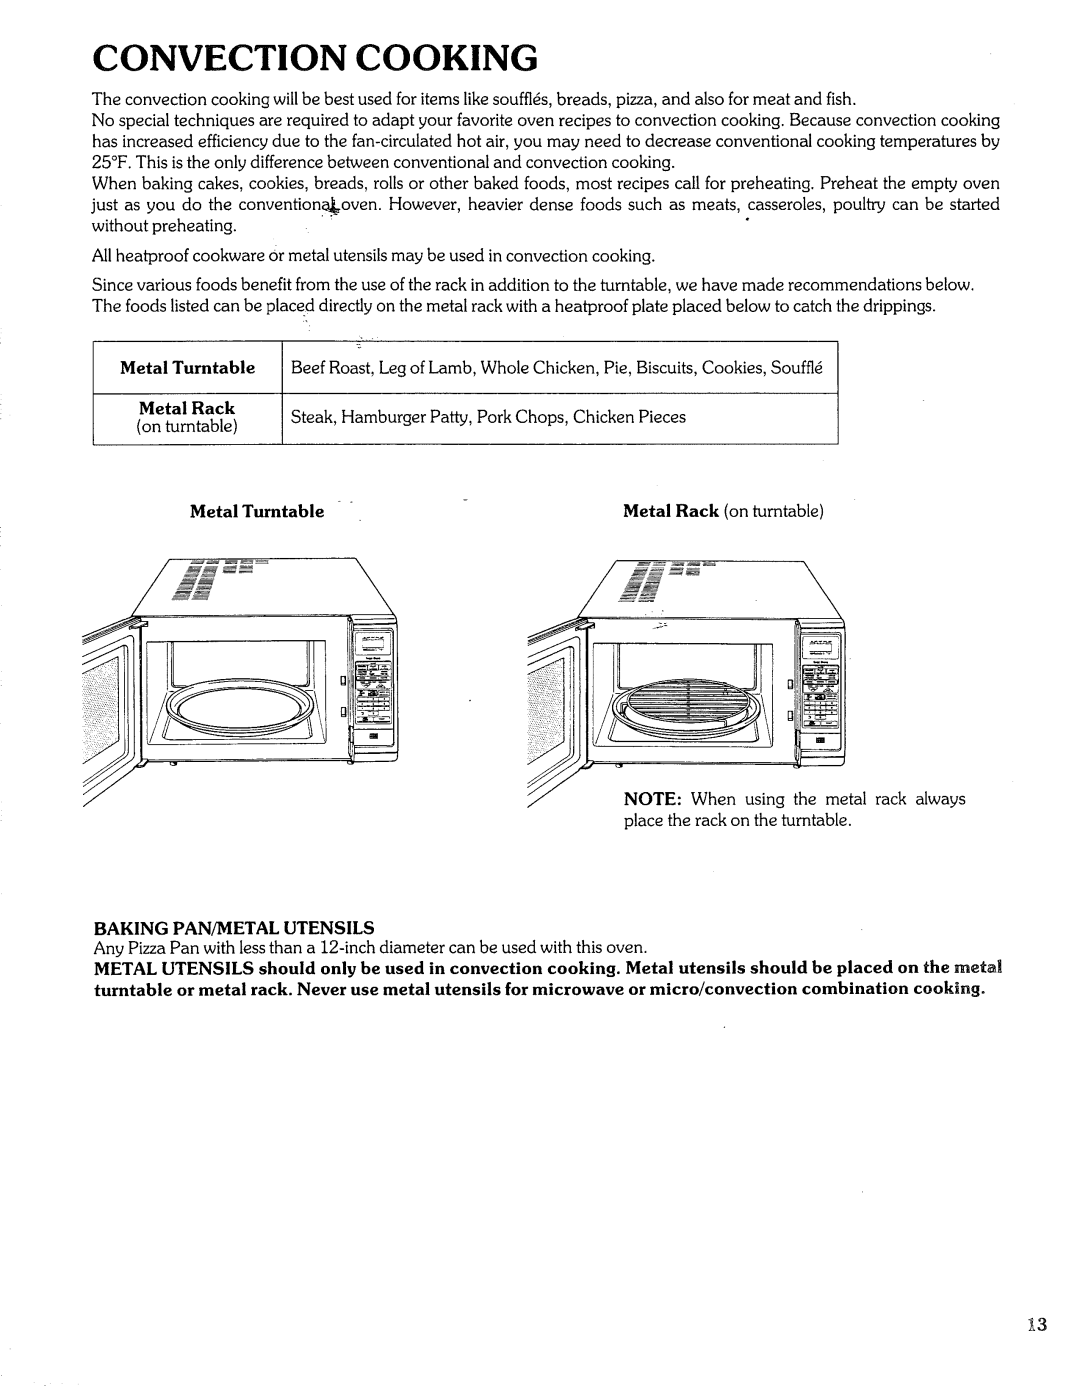 Sears Microwave Oven manual Convection Cooking 